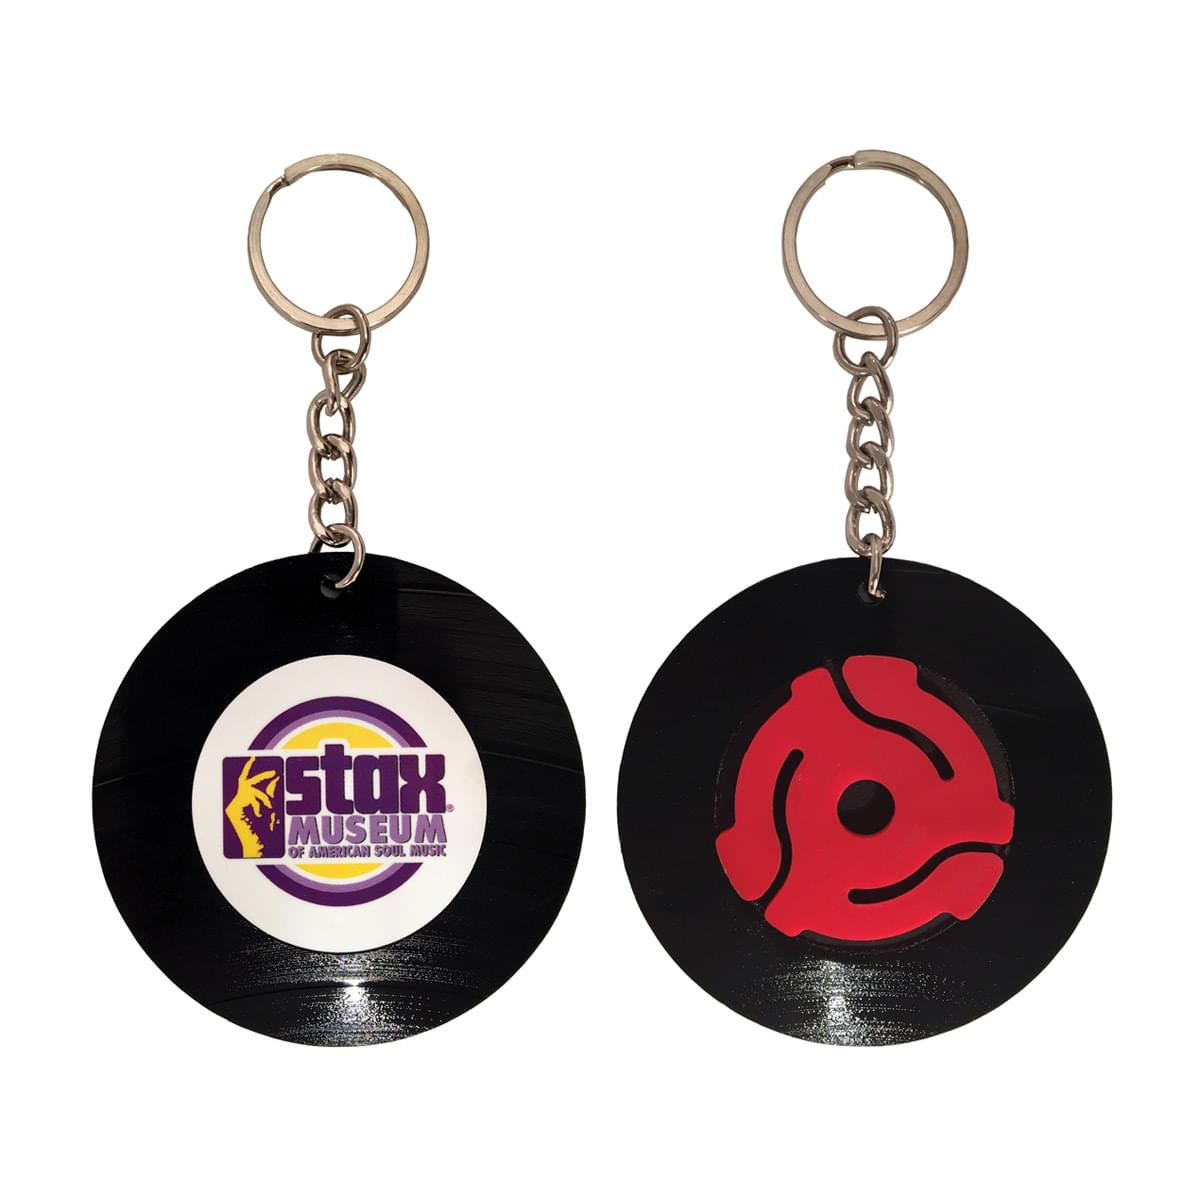 Recycled Vinyl Record Key Chain - 1 Sided Imprint, 1 Side Plain Colored 45rpm Adapter